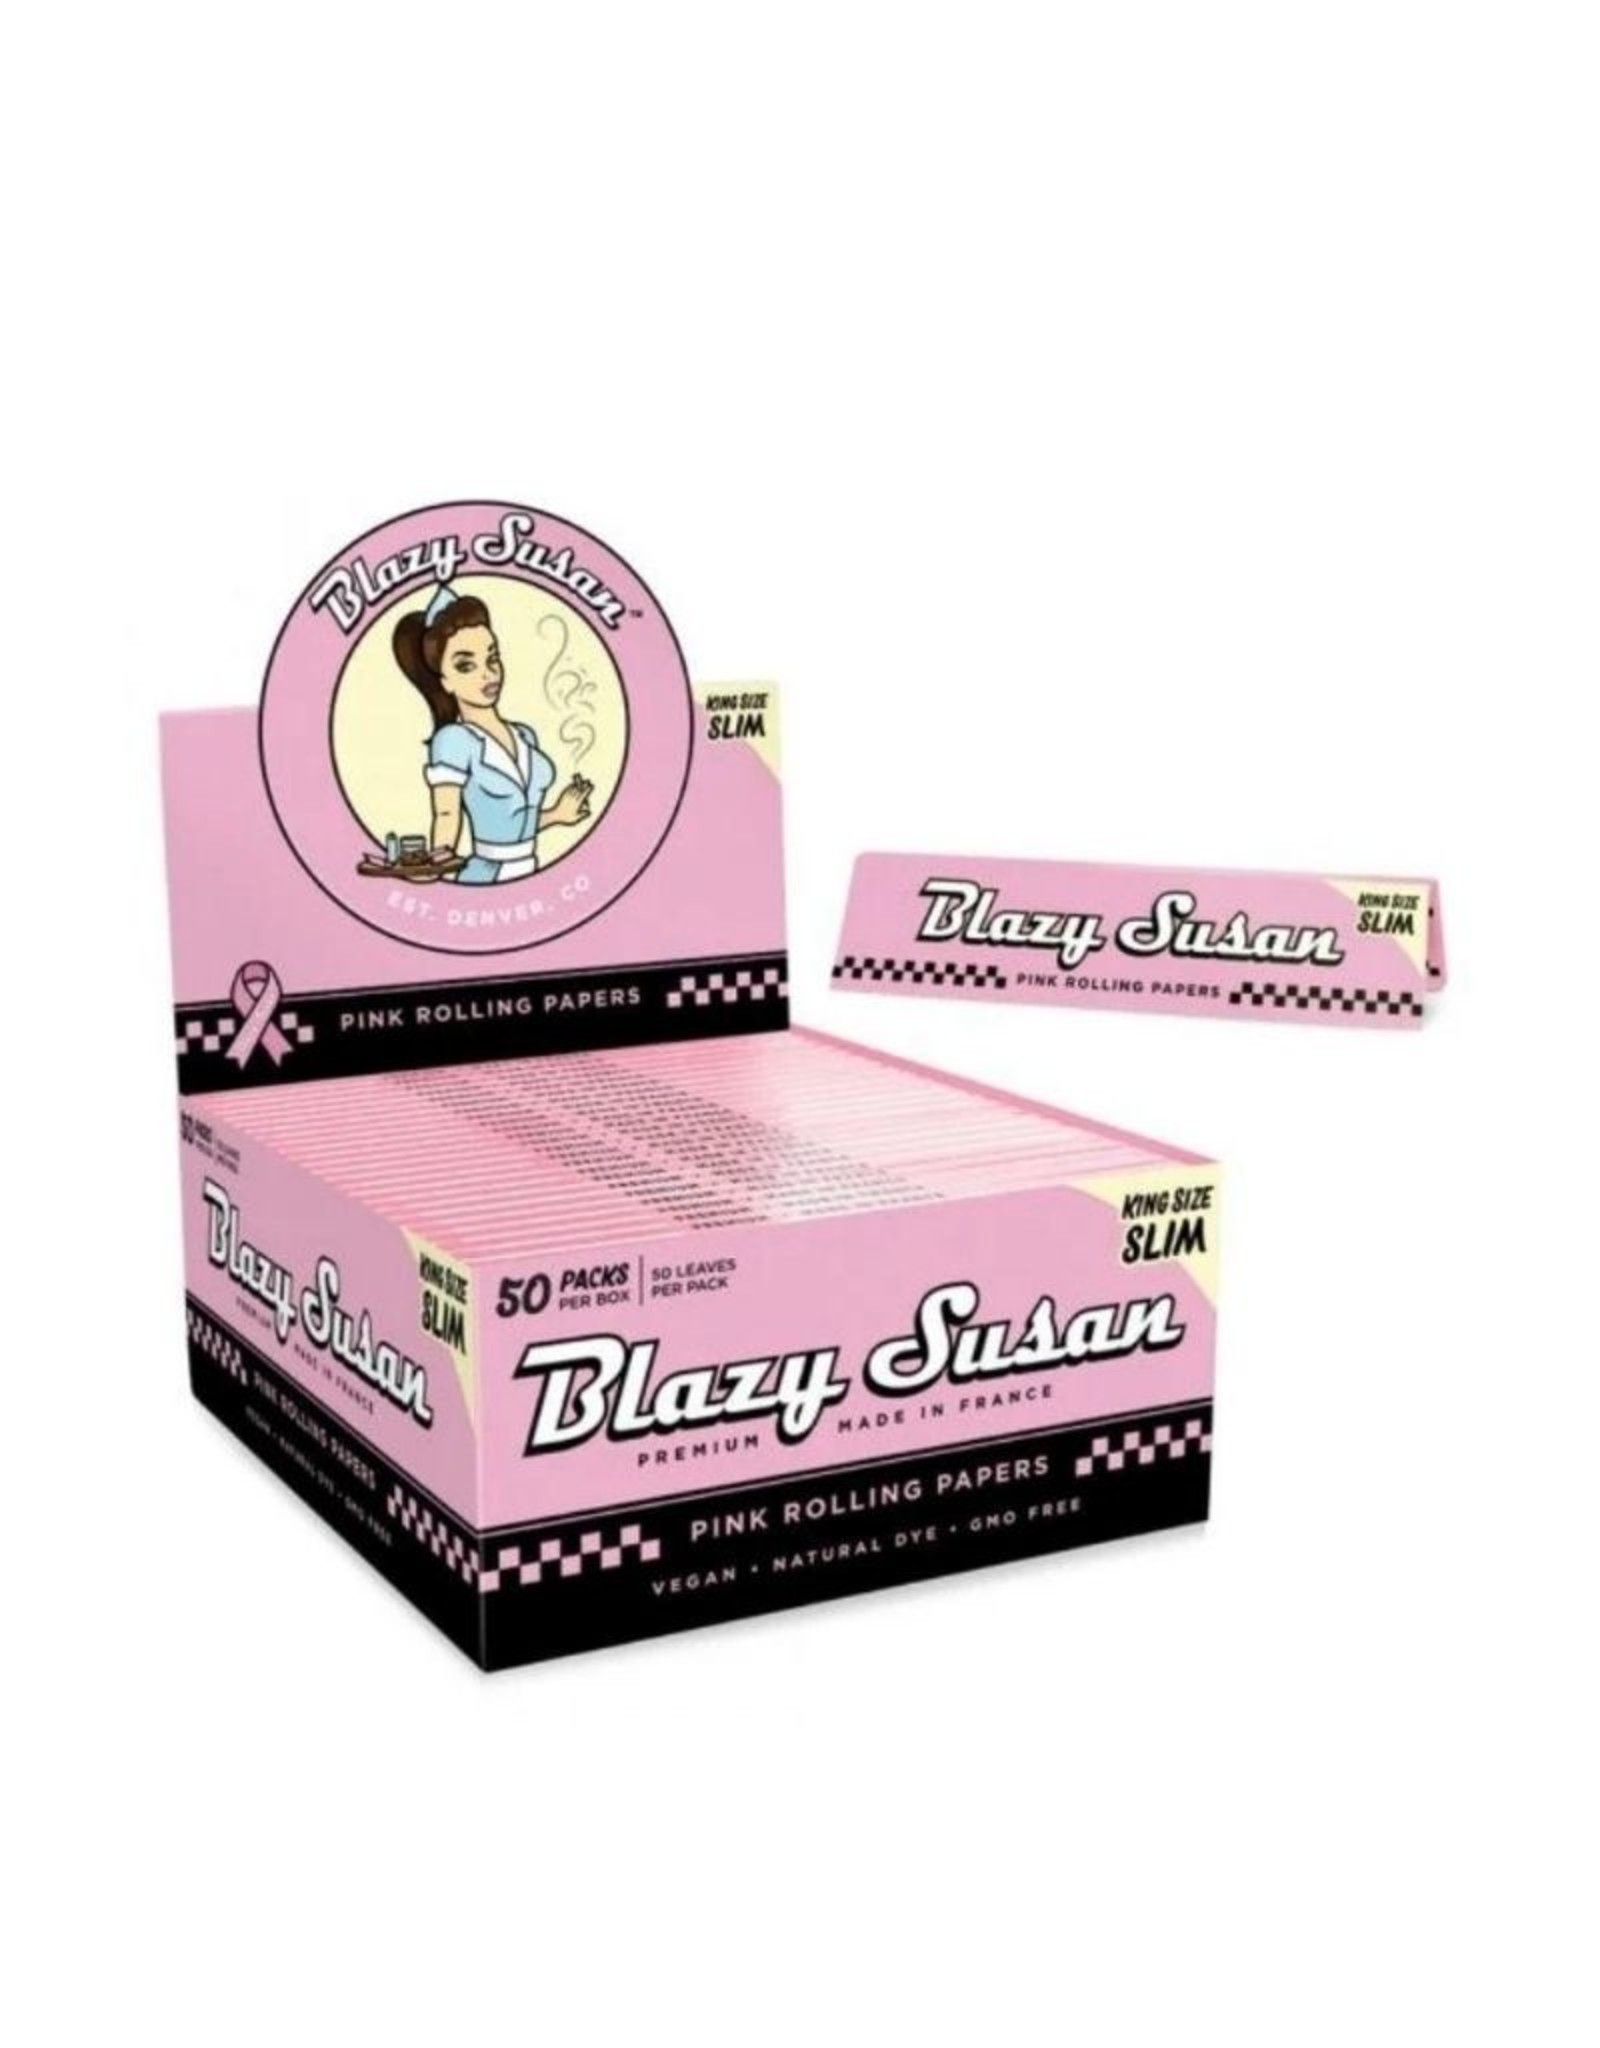 Blazy Susan Blazy Susan King Size Rolling Papers